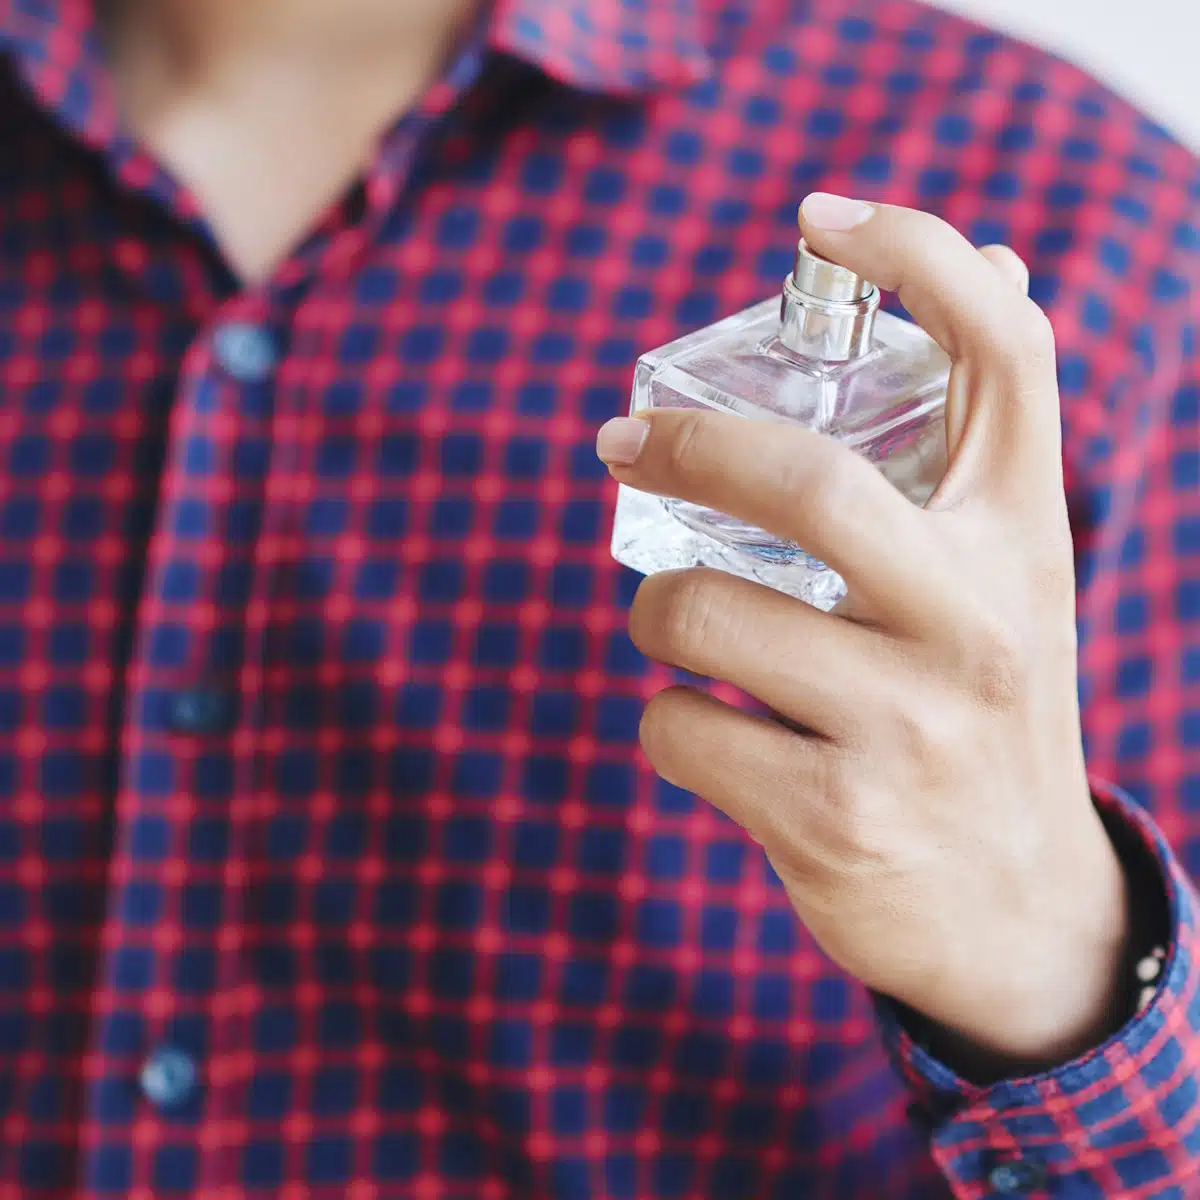 How to Apply Cologne Correctly (and Make It Last)